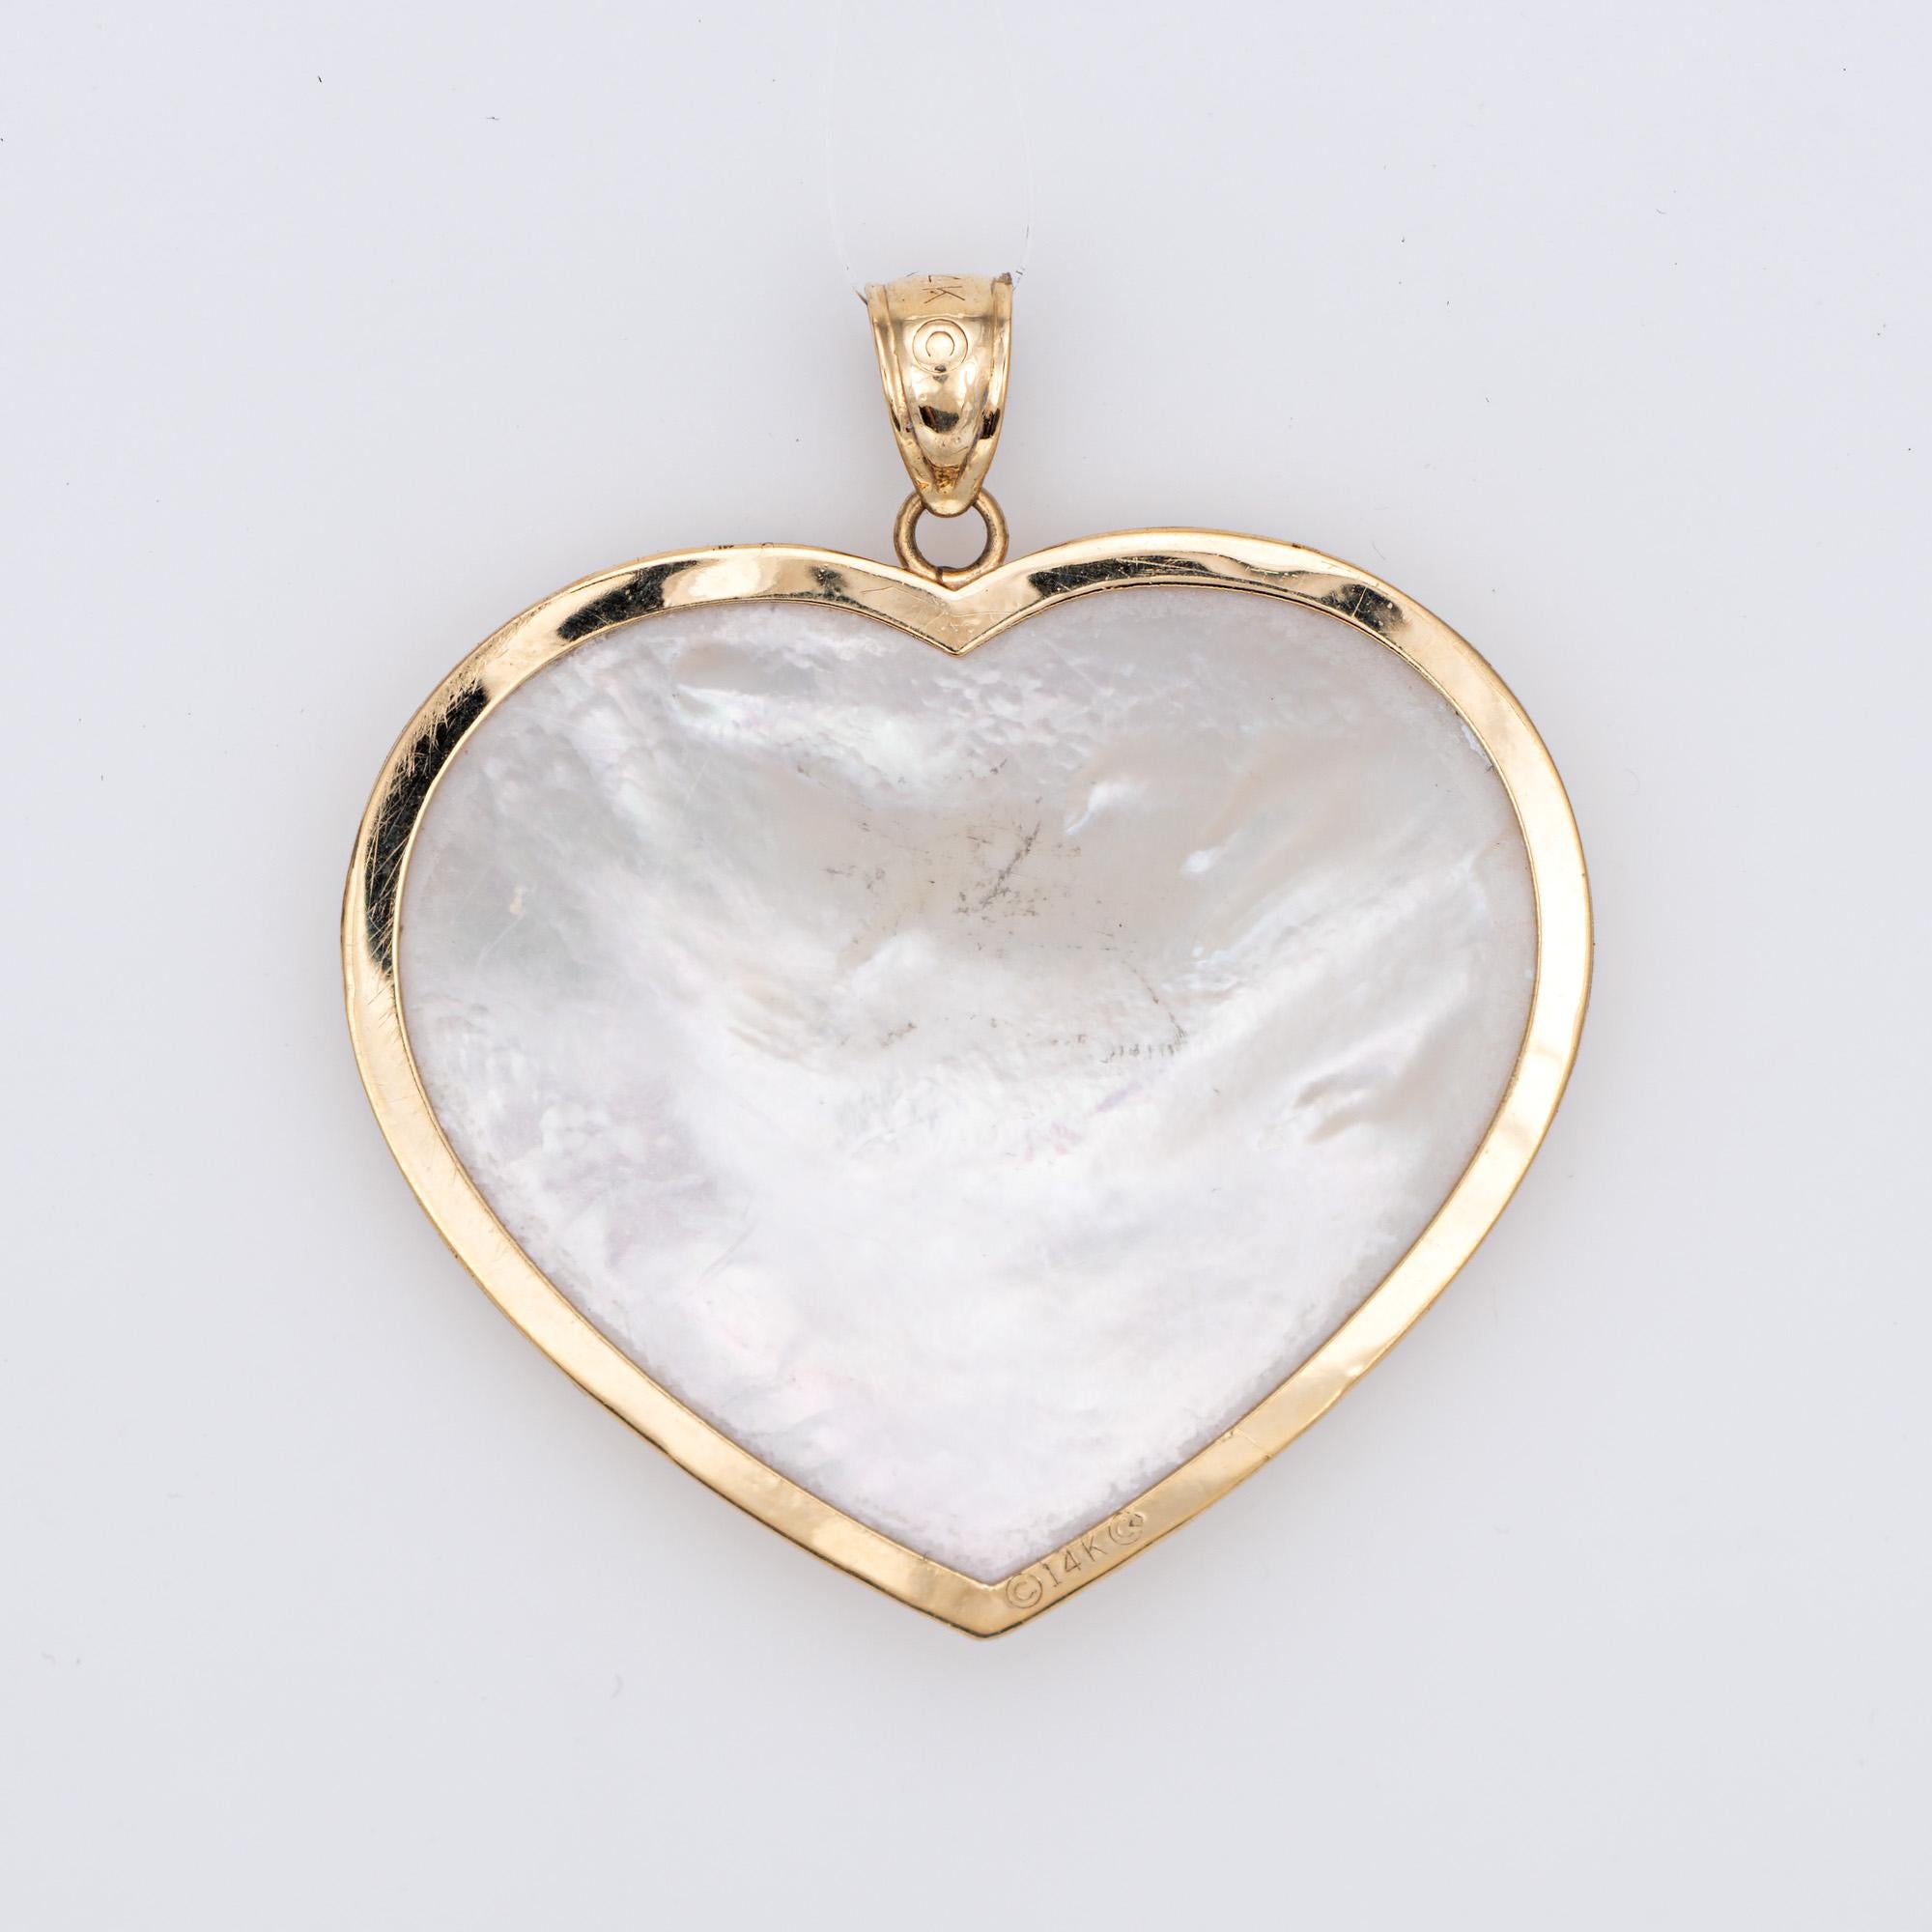 Large Heart Pendant 14k Yellow Gold Mother of Pearl Estate Fine Jewelry In Good Condition For Sale In Torrance, CA